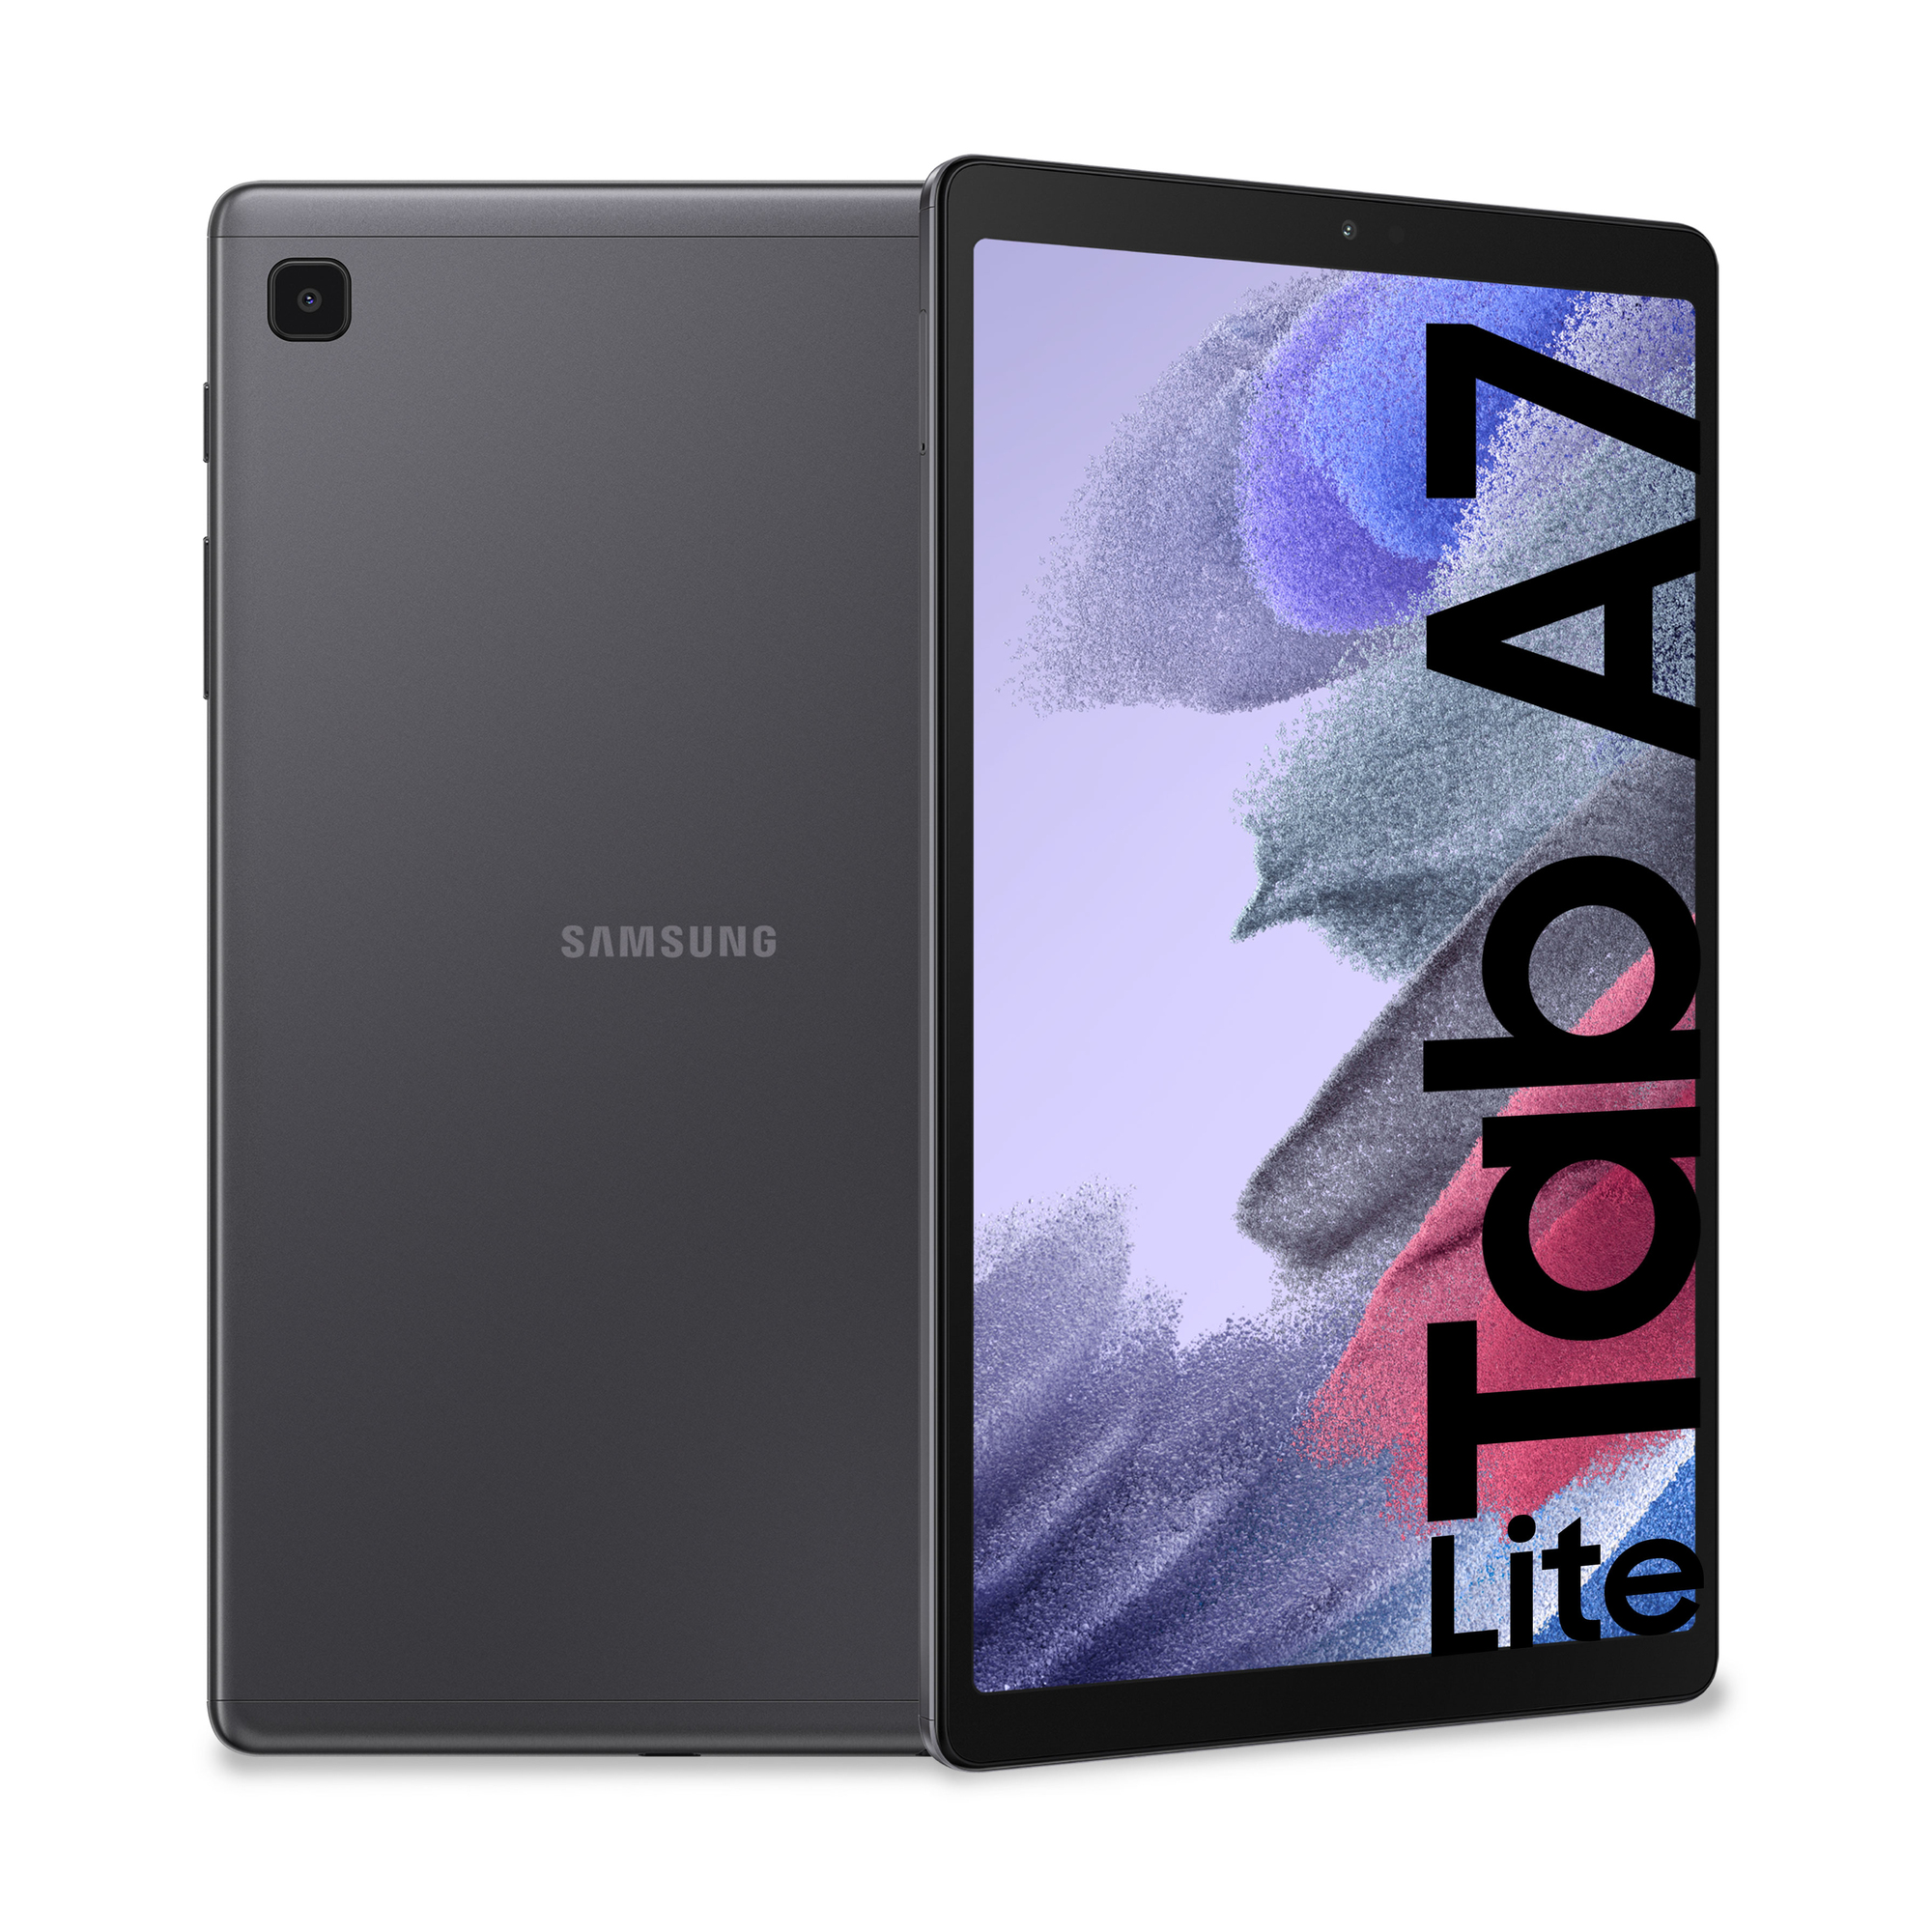 samsung tablette tactile - galaxy tab a7 lite - 8,7 - ram 3go - wifi - stockage 32go - anthracite - neuf